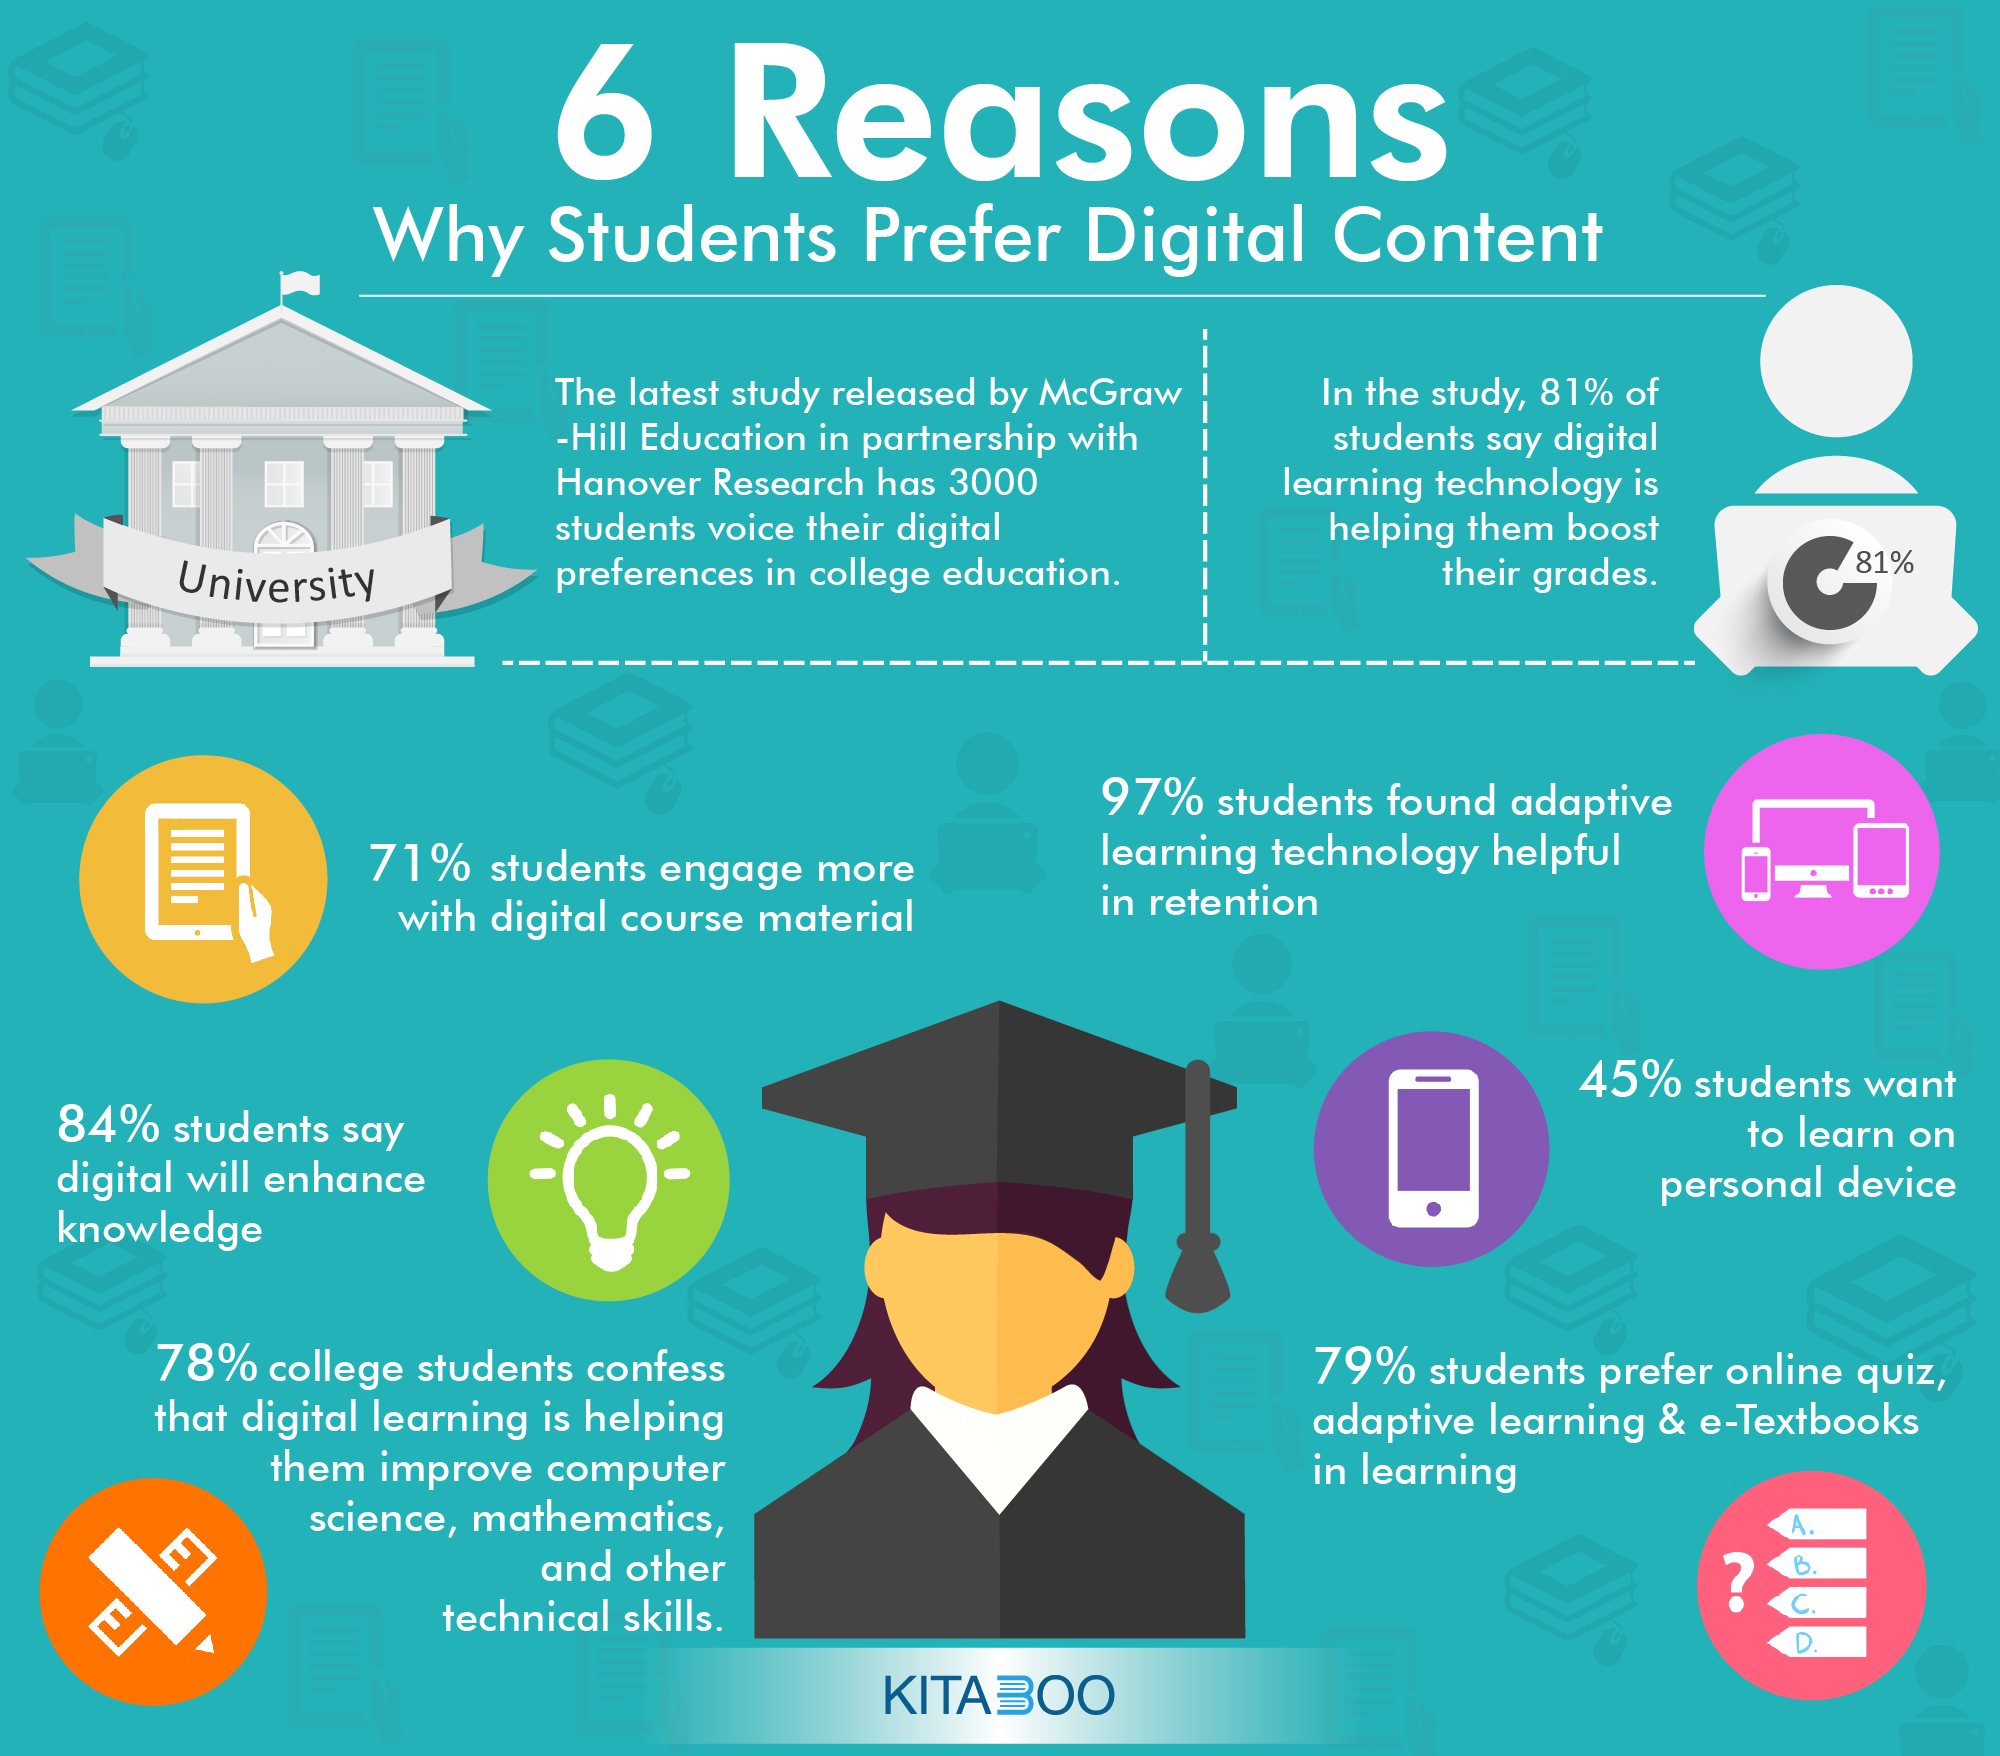 6-Reasons-Why-Students-Prefer-Digital-Content